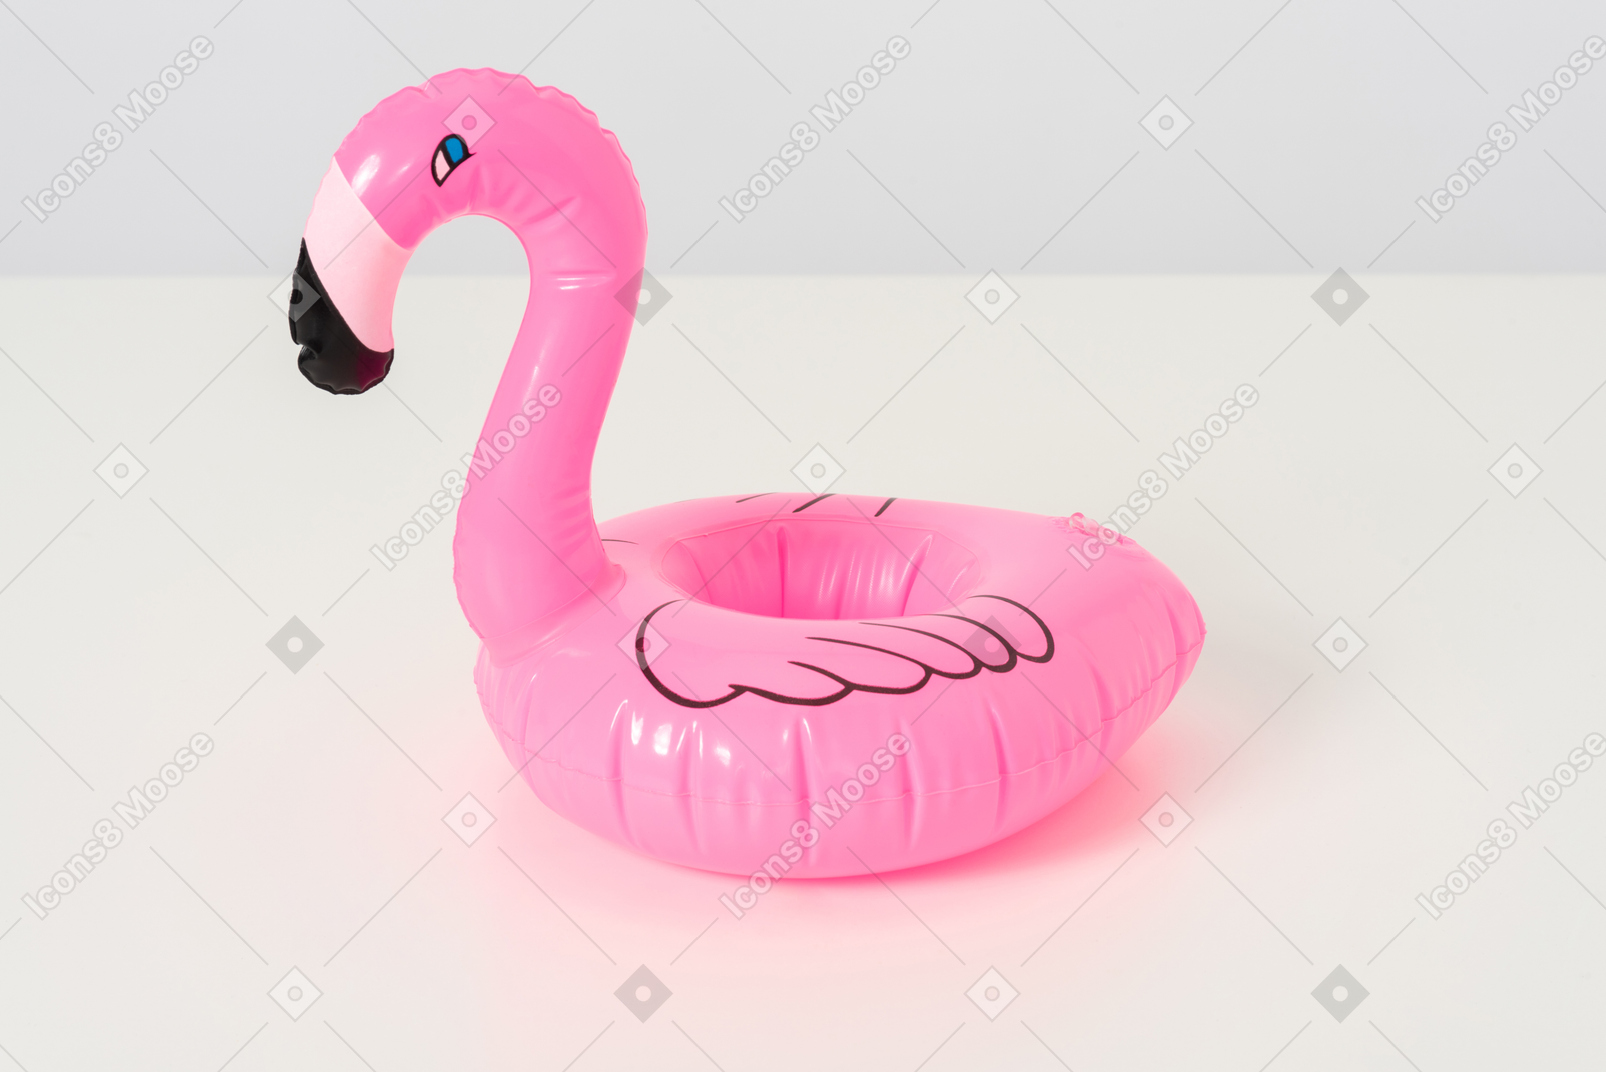 A tiny inflatable pink flamingo looking back slyly at everyone who wants to play with it